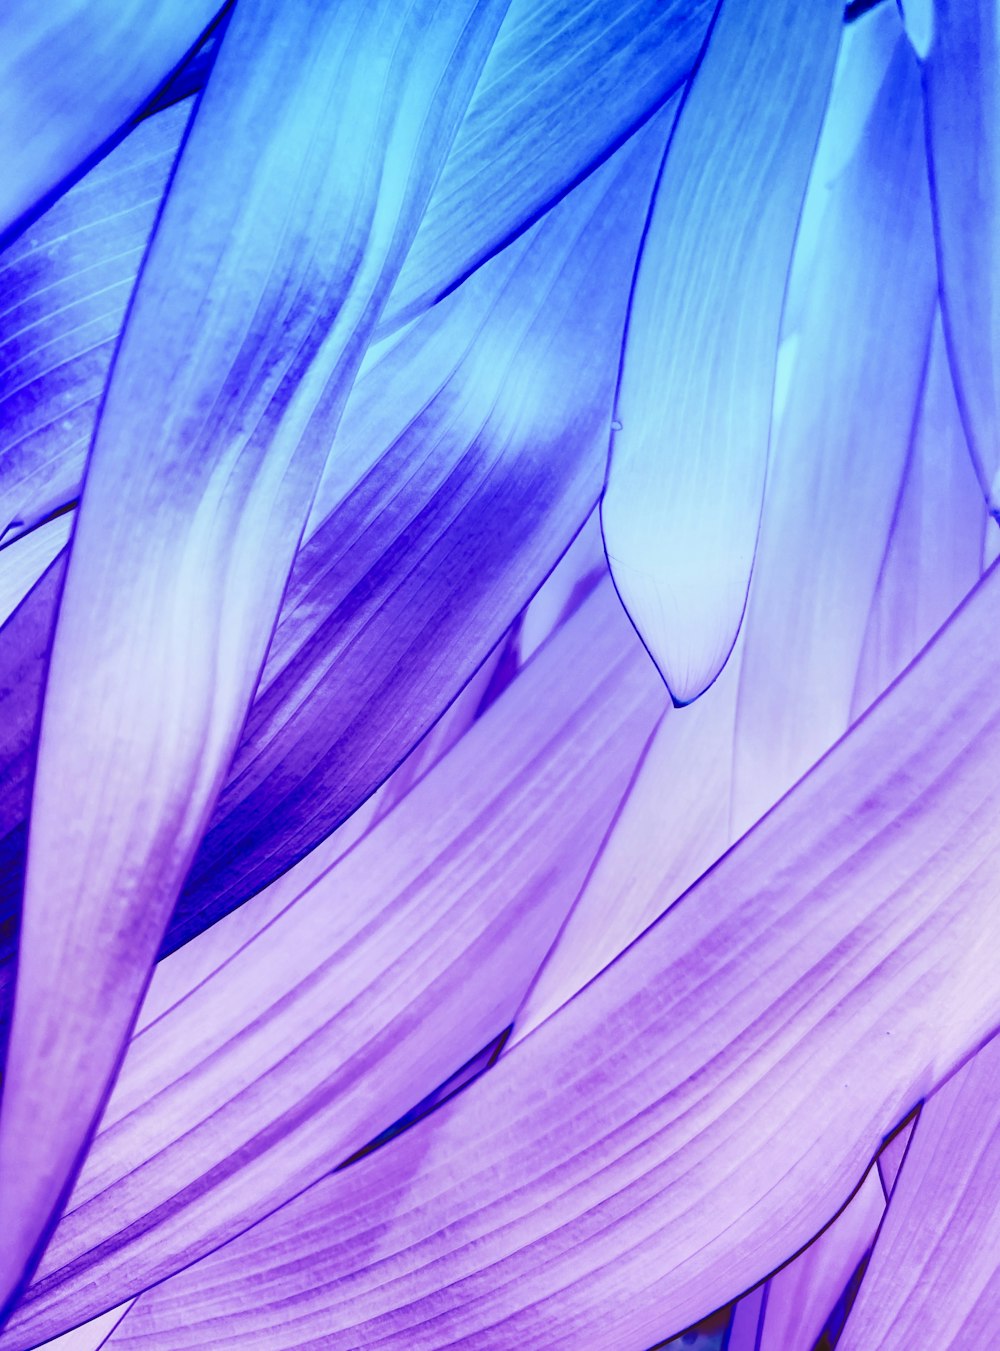 a close up of a purple and blue flower